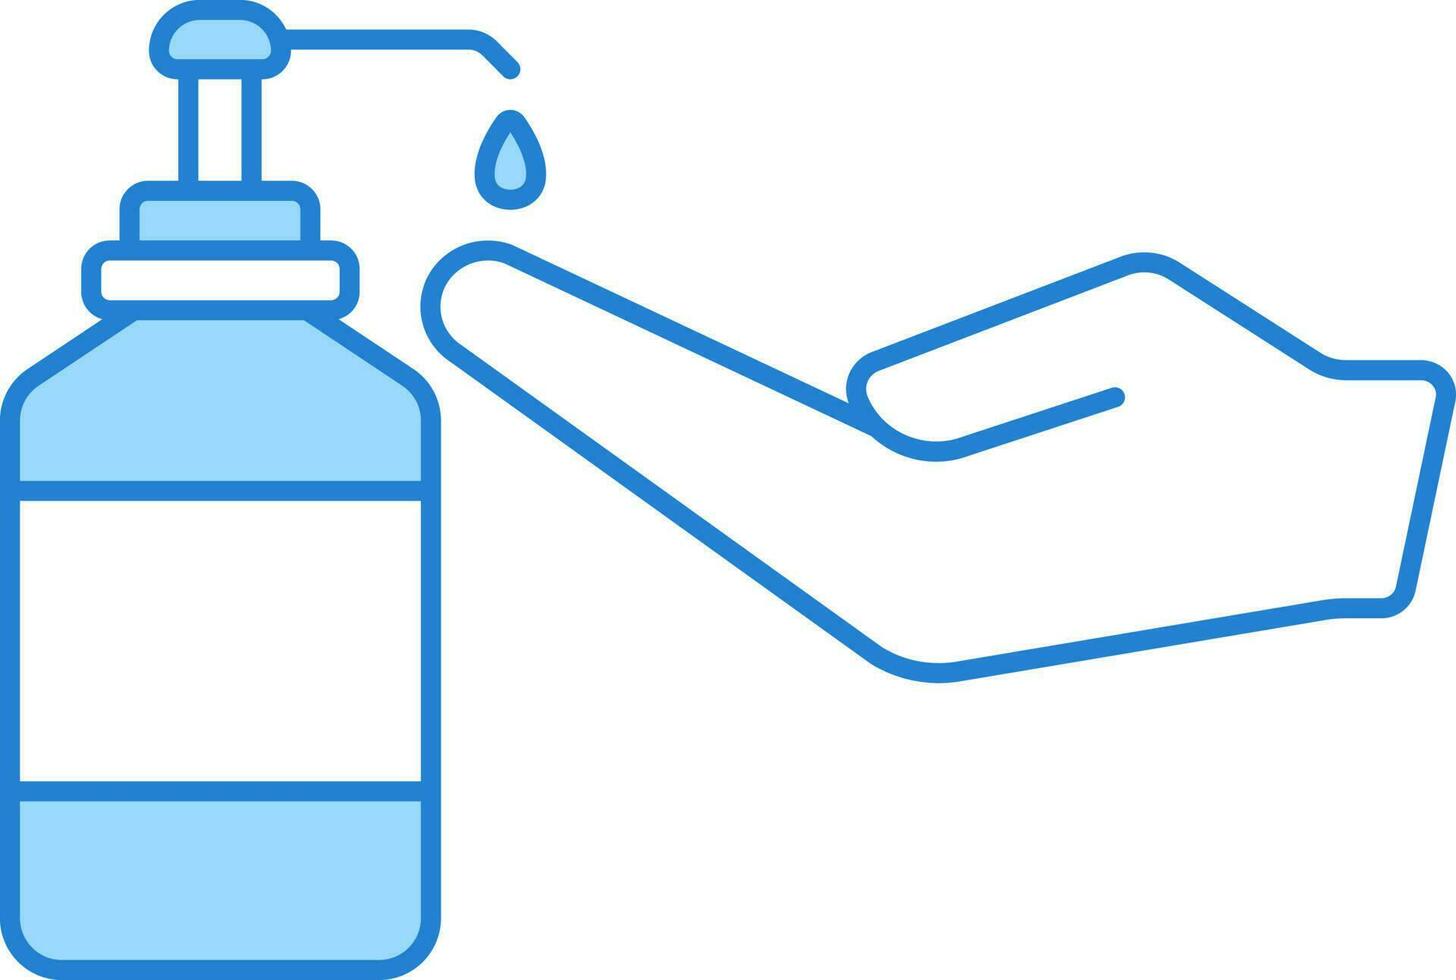 Dispenser Bottle Use Human Hand Icon In Blue And White Color. vector